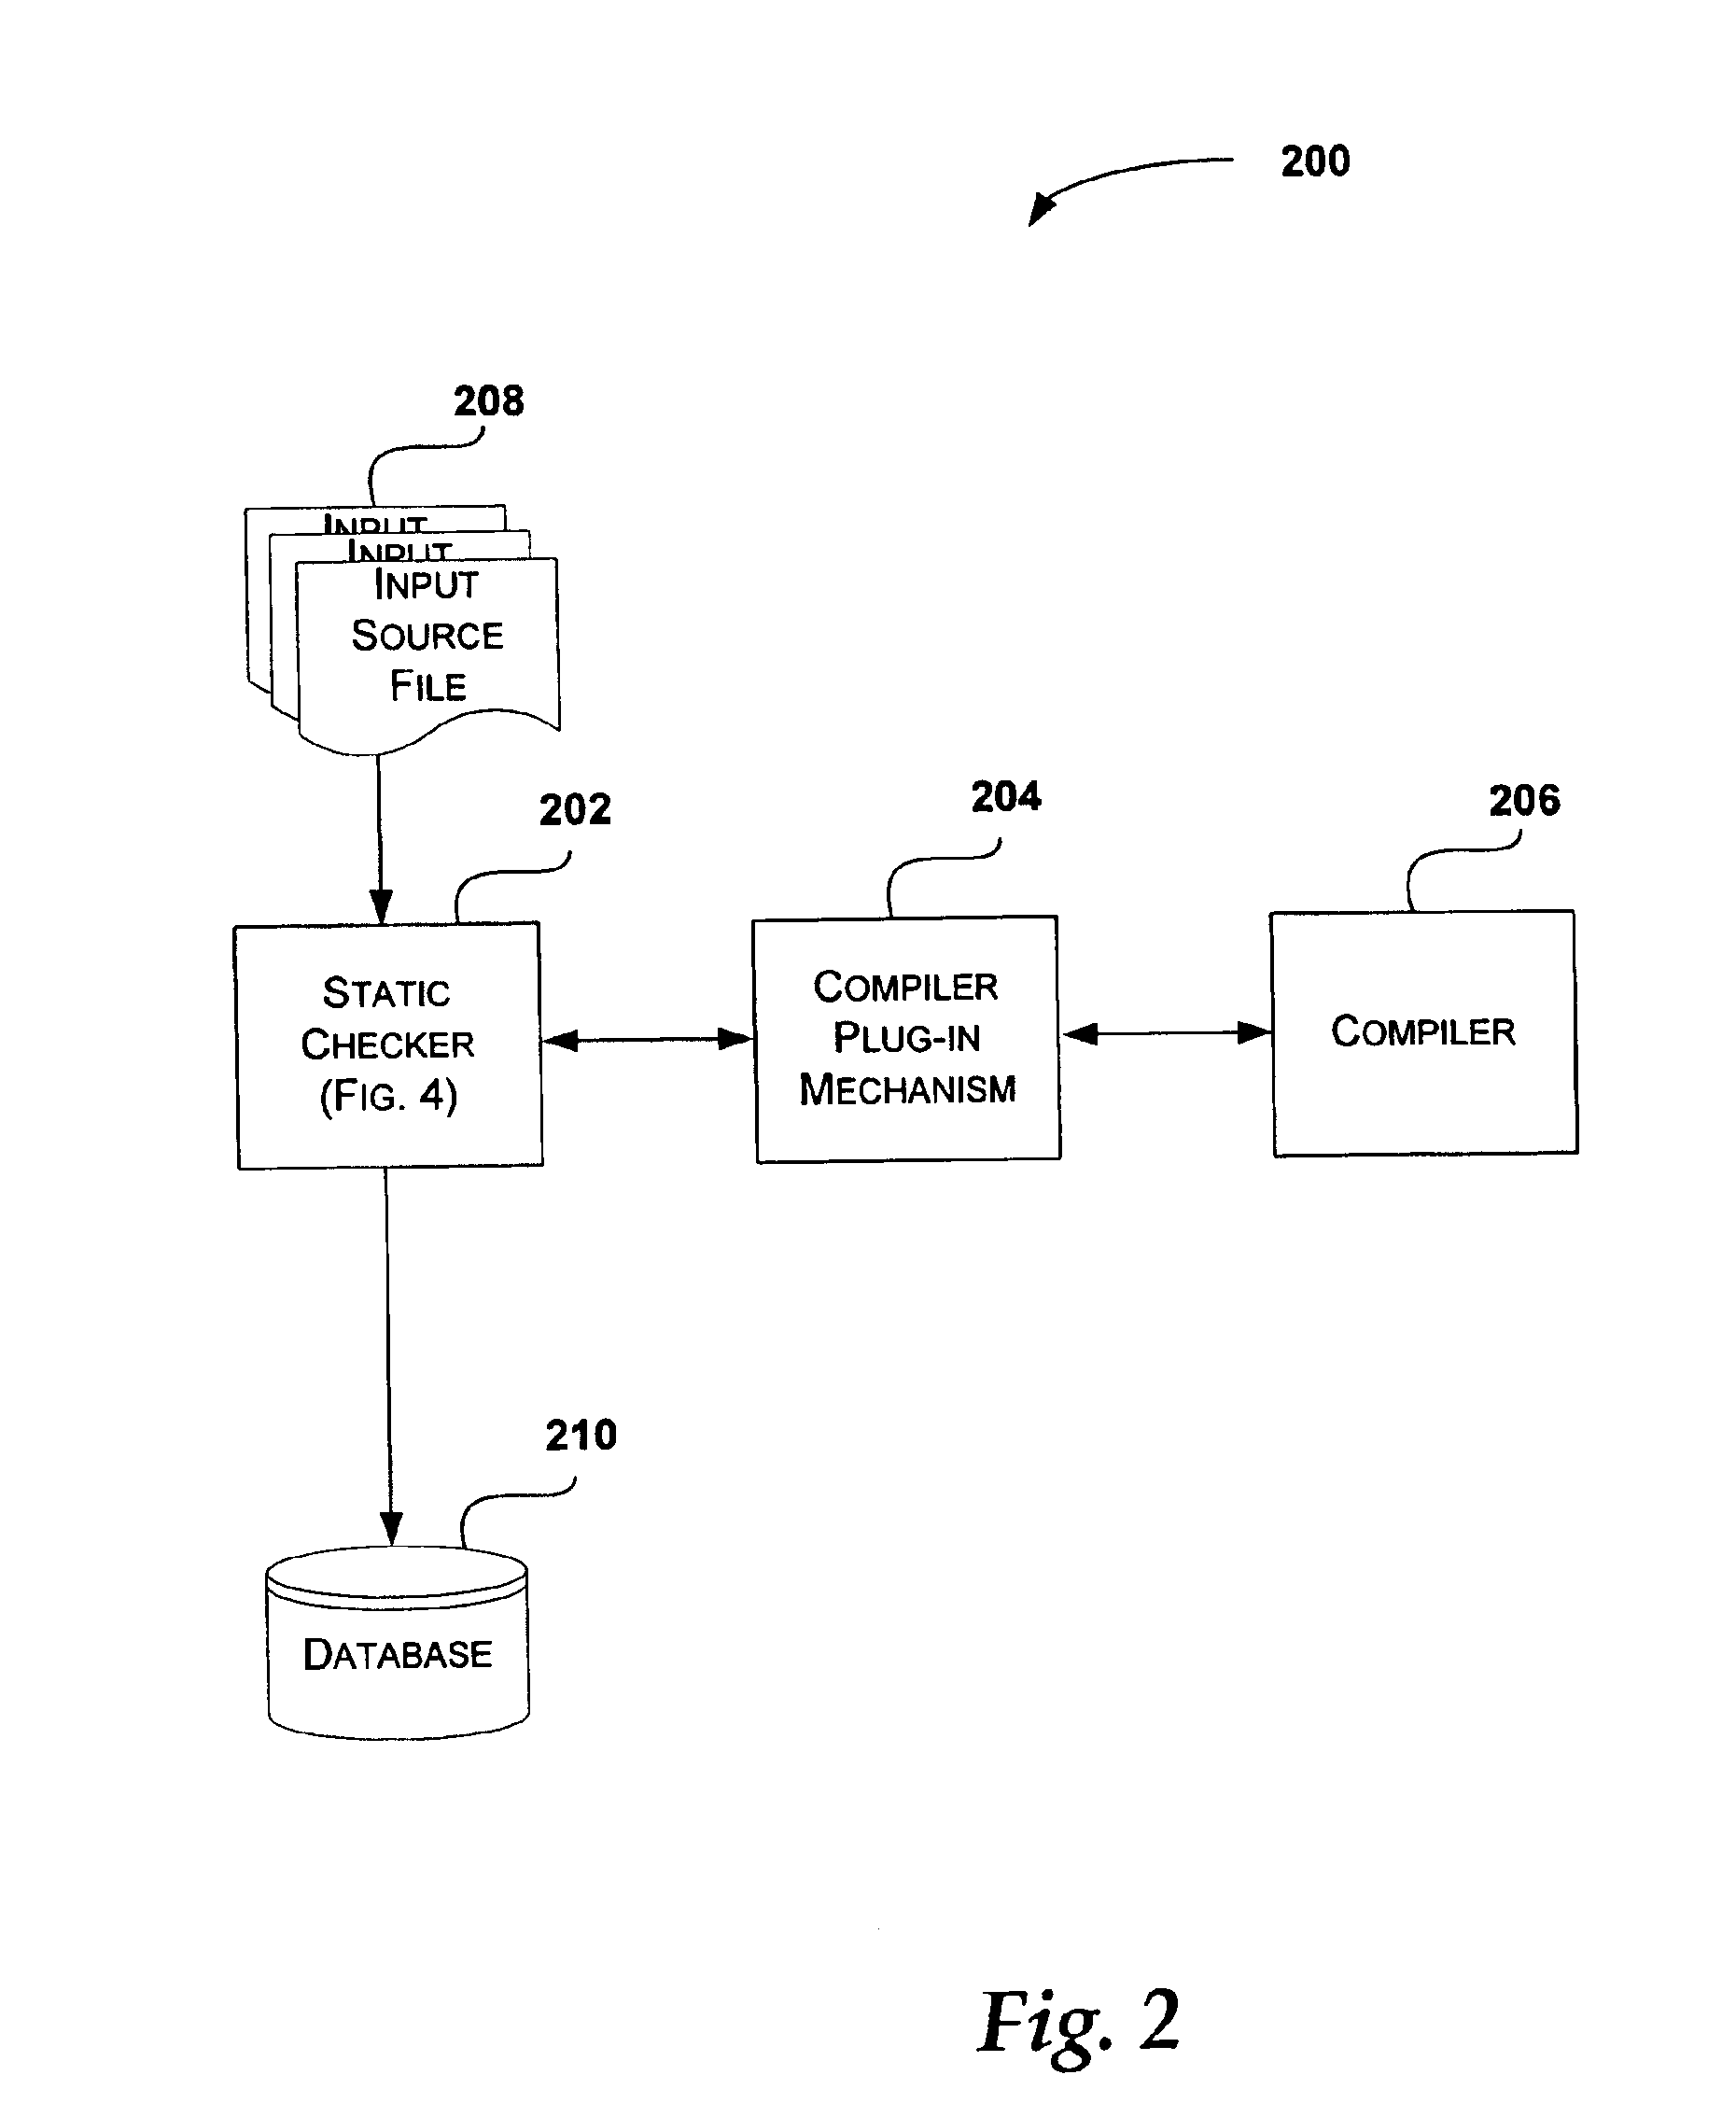 System and method for statically checking source code